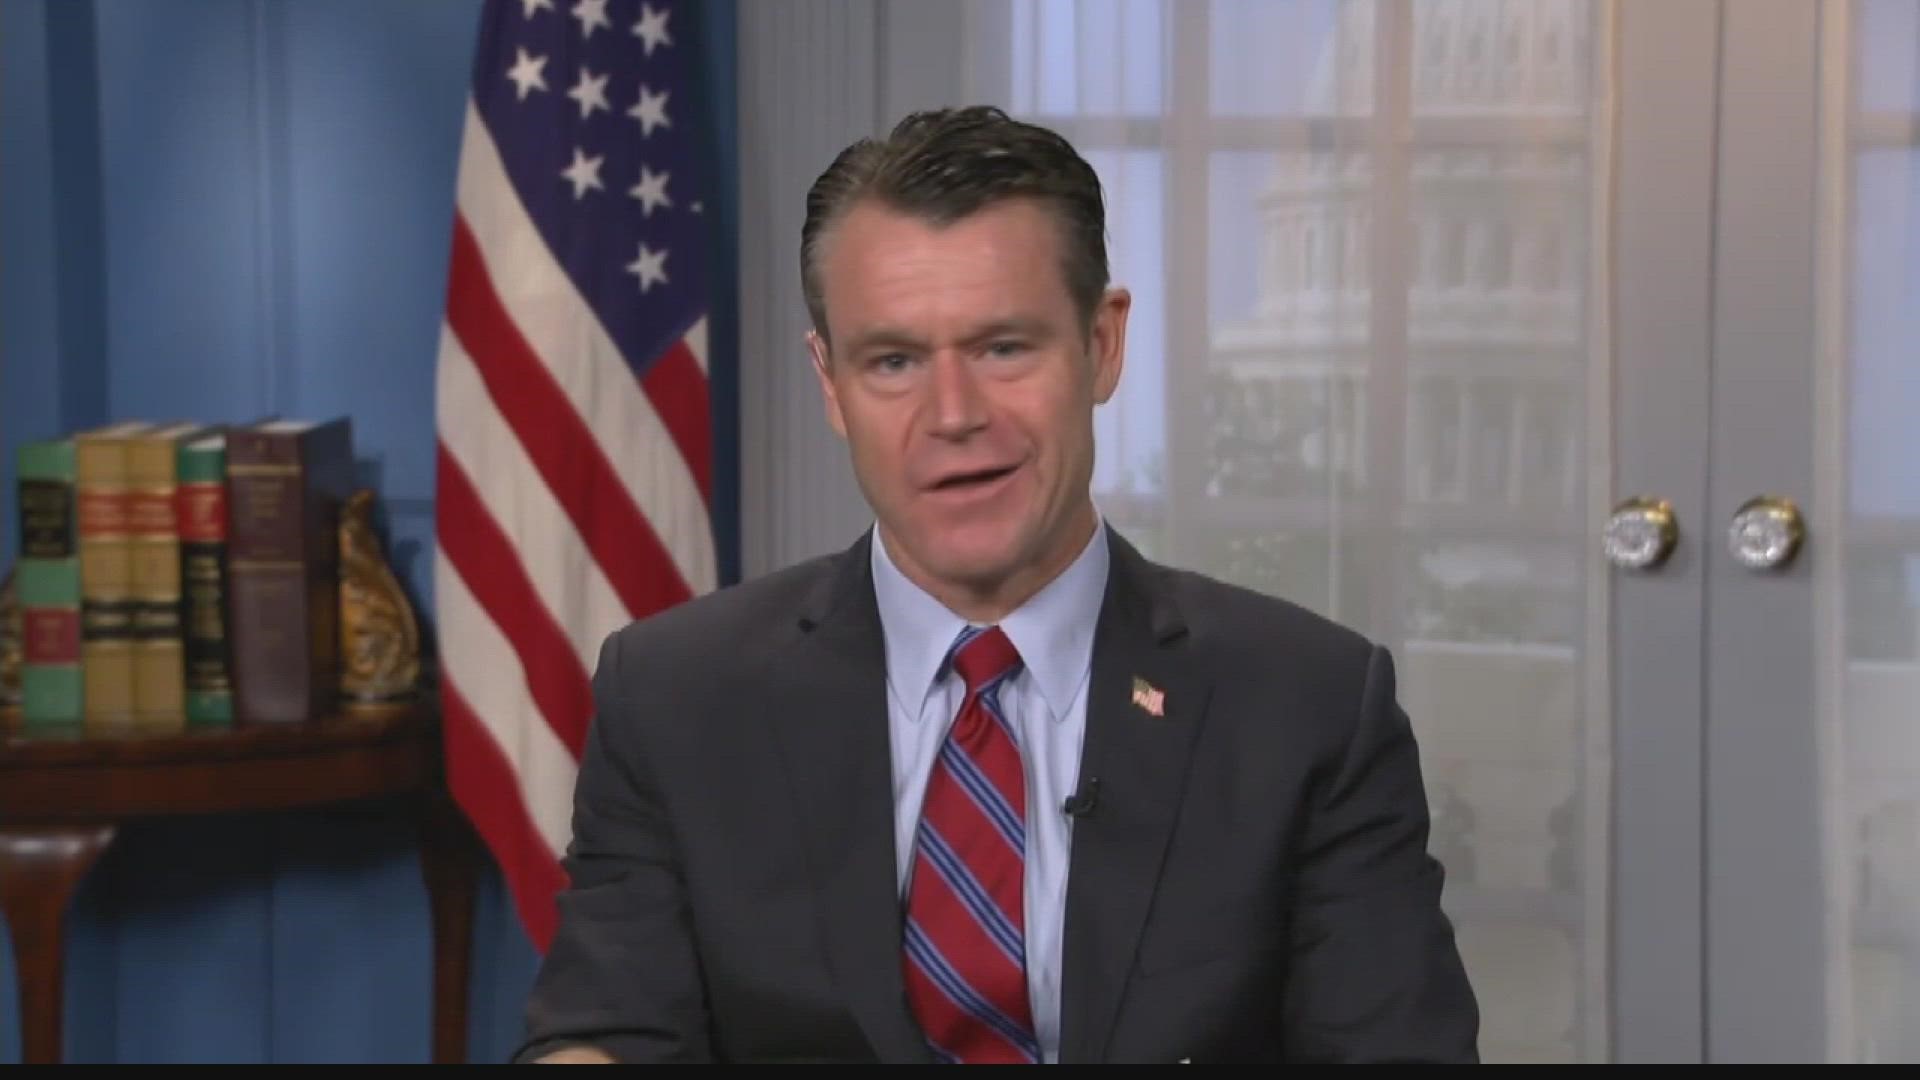 Indiana Sen. Todd Young said if Congress doesn't raise the debt ceiling in December, lenders will be more nervous about the ability to pay that money back on time.